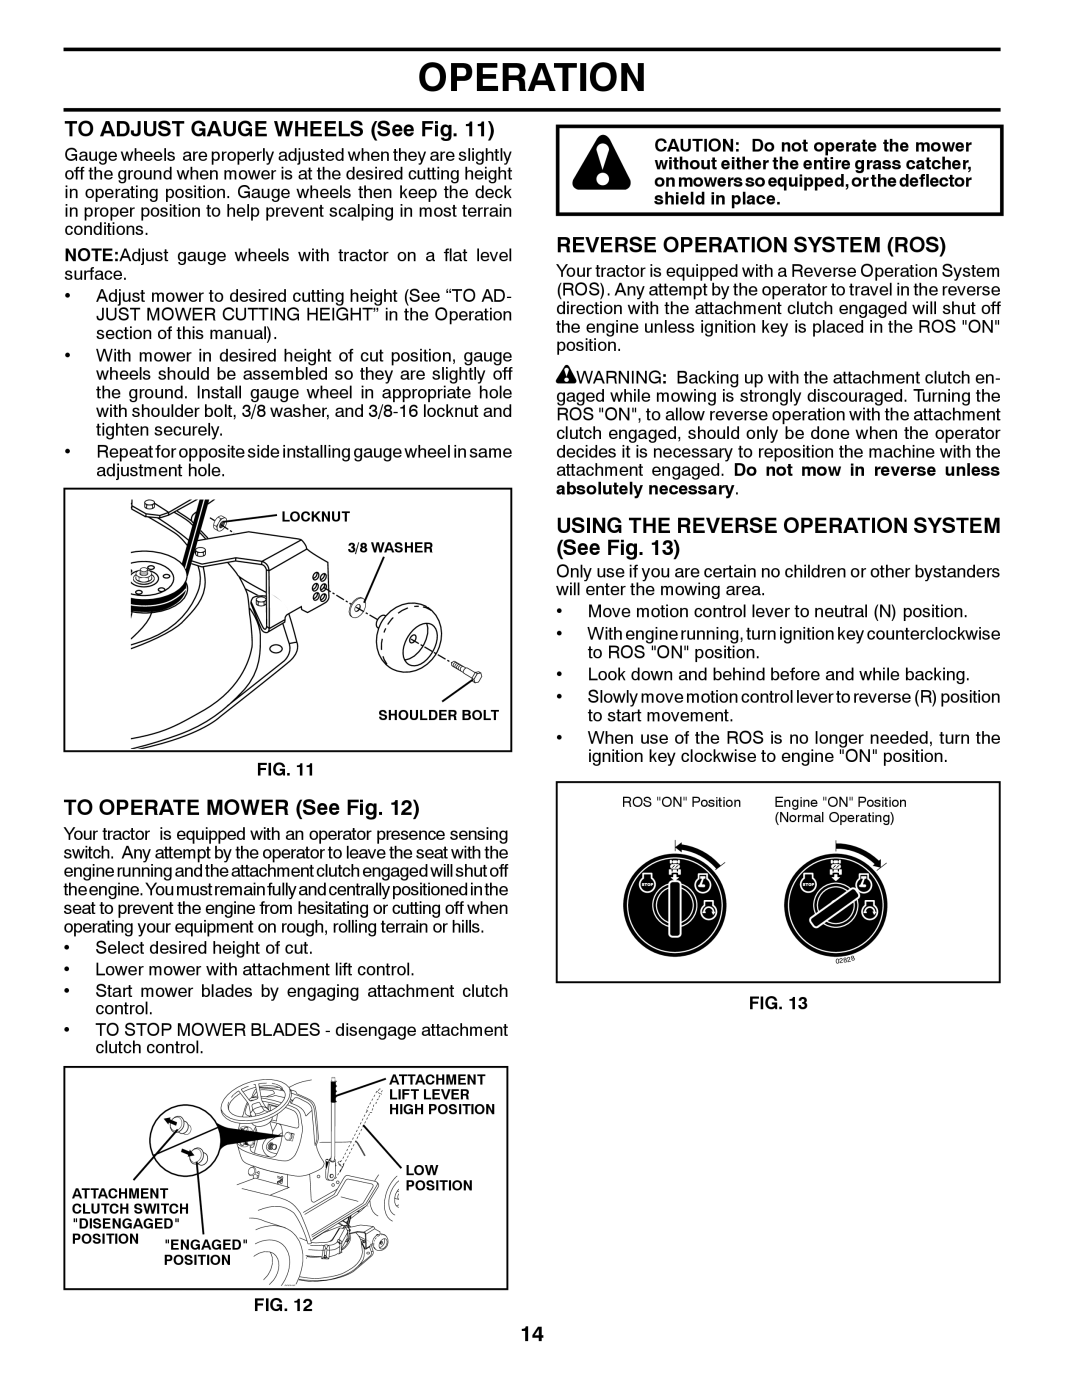 Husqvarna CTH2036 XP owner manual TO ADJUST GAUGE WHEELS See Fig, TO OPERATE MOWER See Fig, Reverse Operation System Ros 